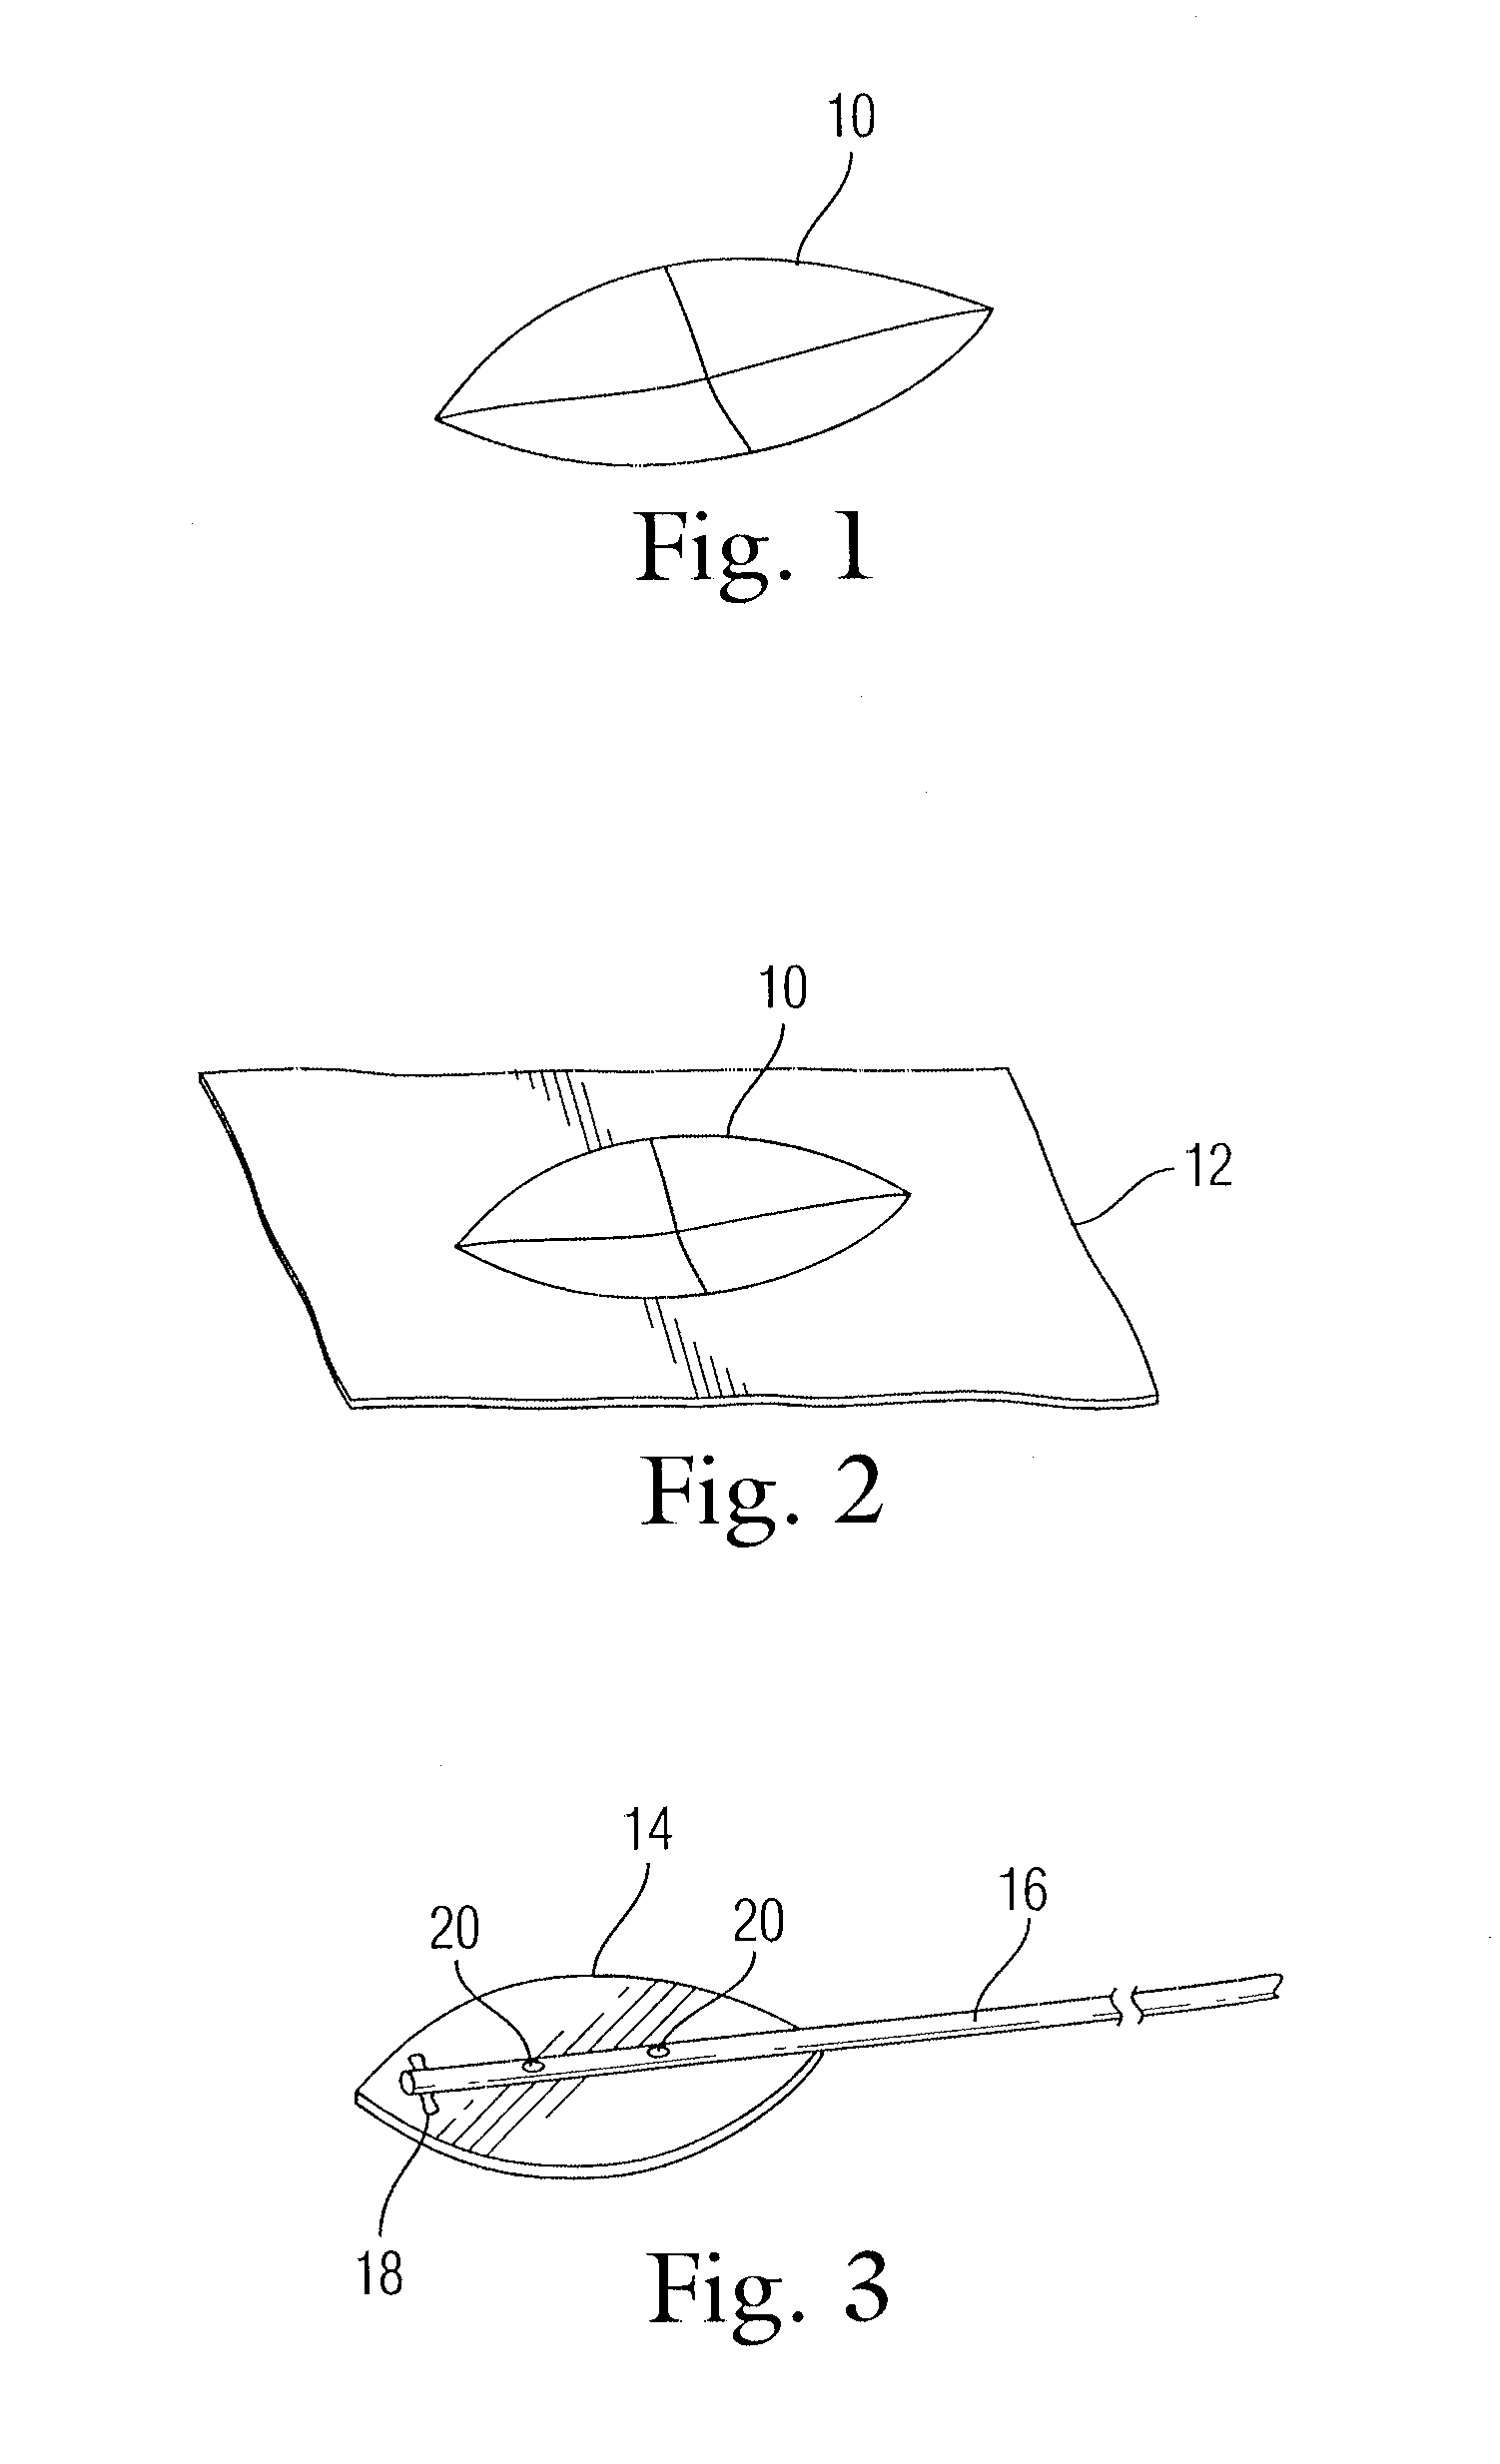 Implant for use in surgery for glaucoma and a method